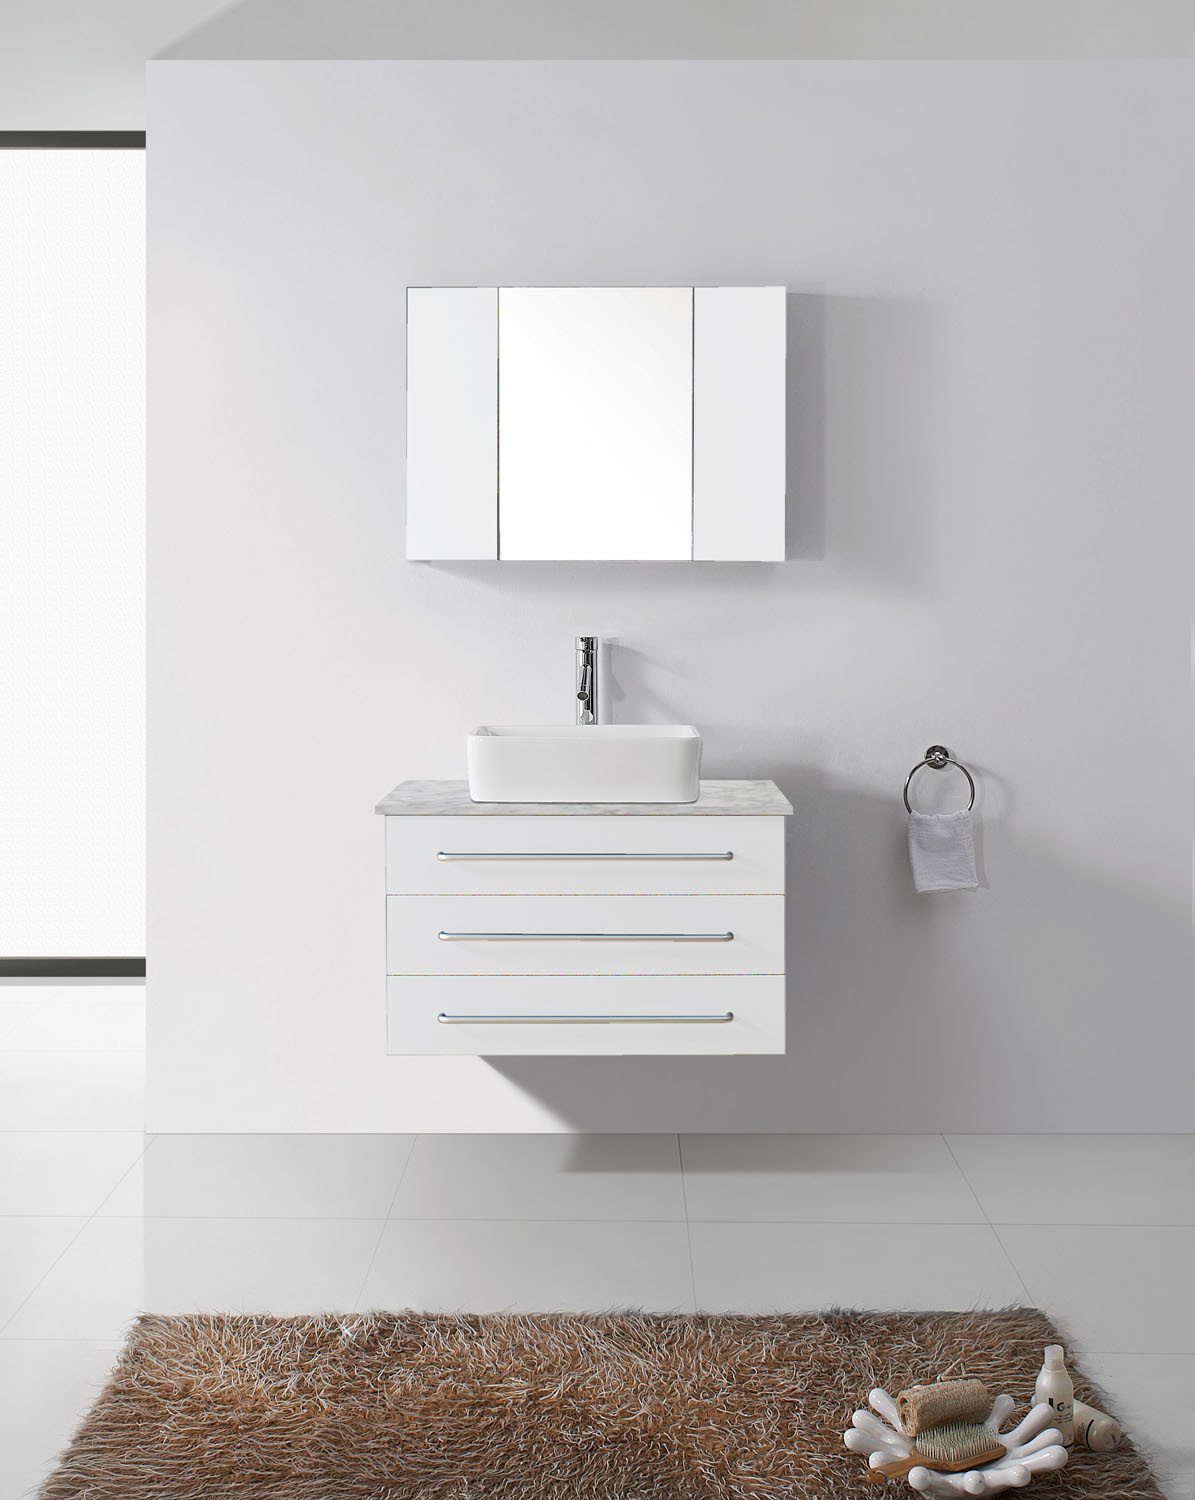 Virtu USA Ivy 36" Single Square Sink White Top Vanity in White with Polished Chrome Faucet and Mirror Vanity Virtu USA 